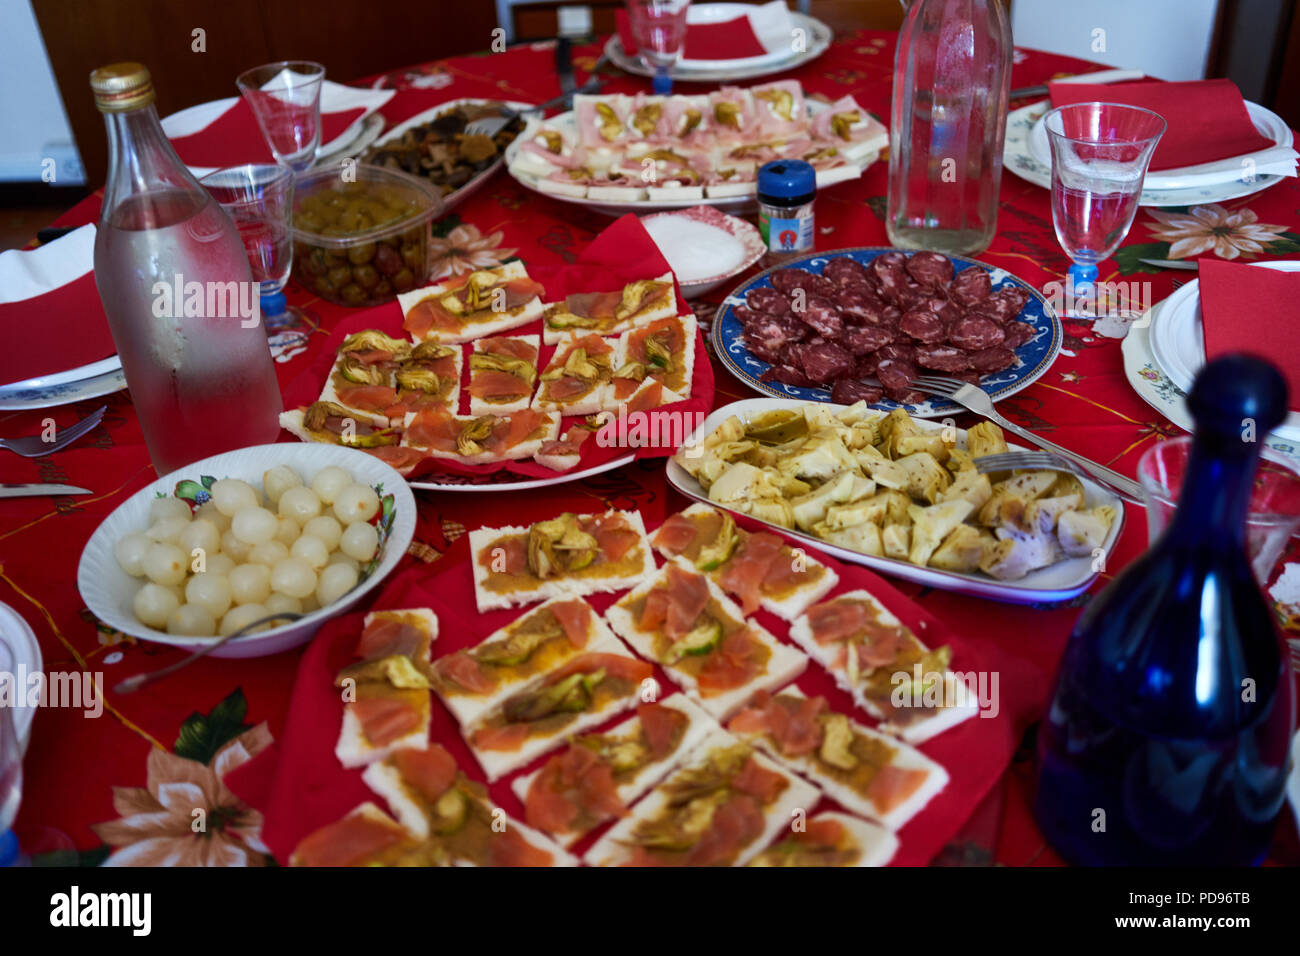 Close up view of a Christmas dinner table Stock Photo